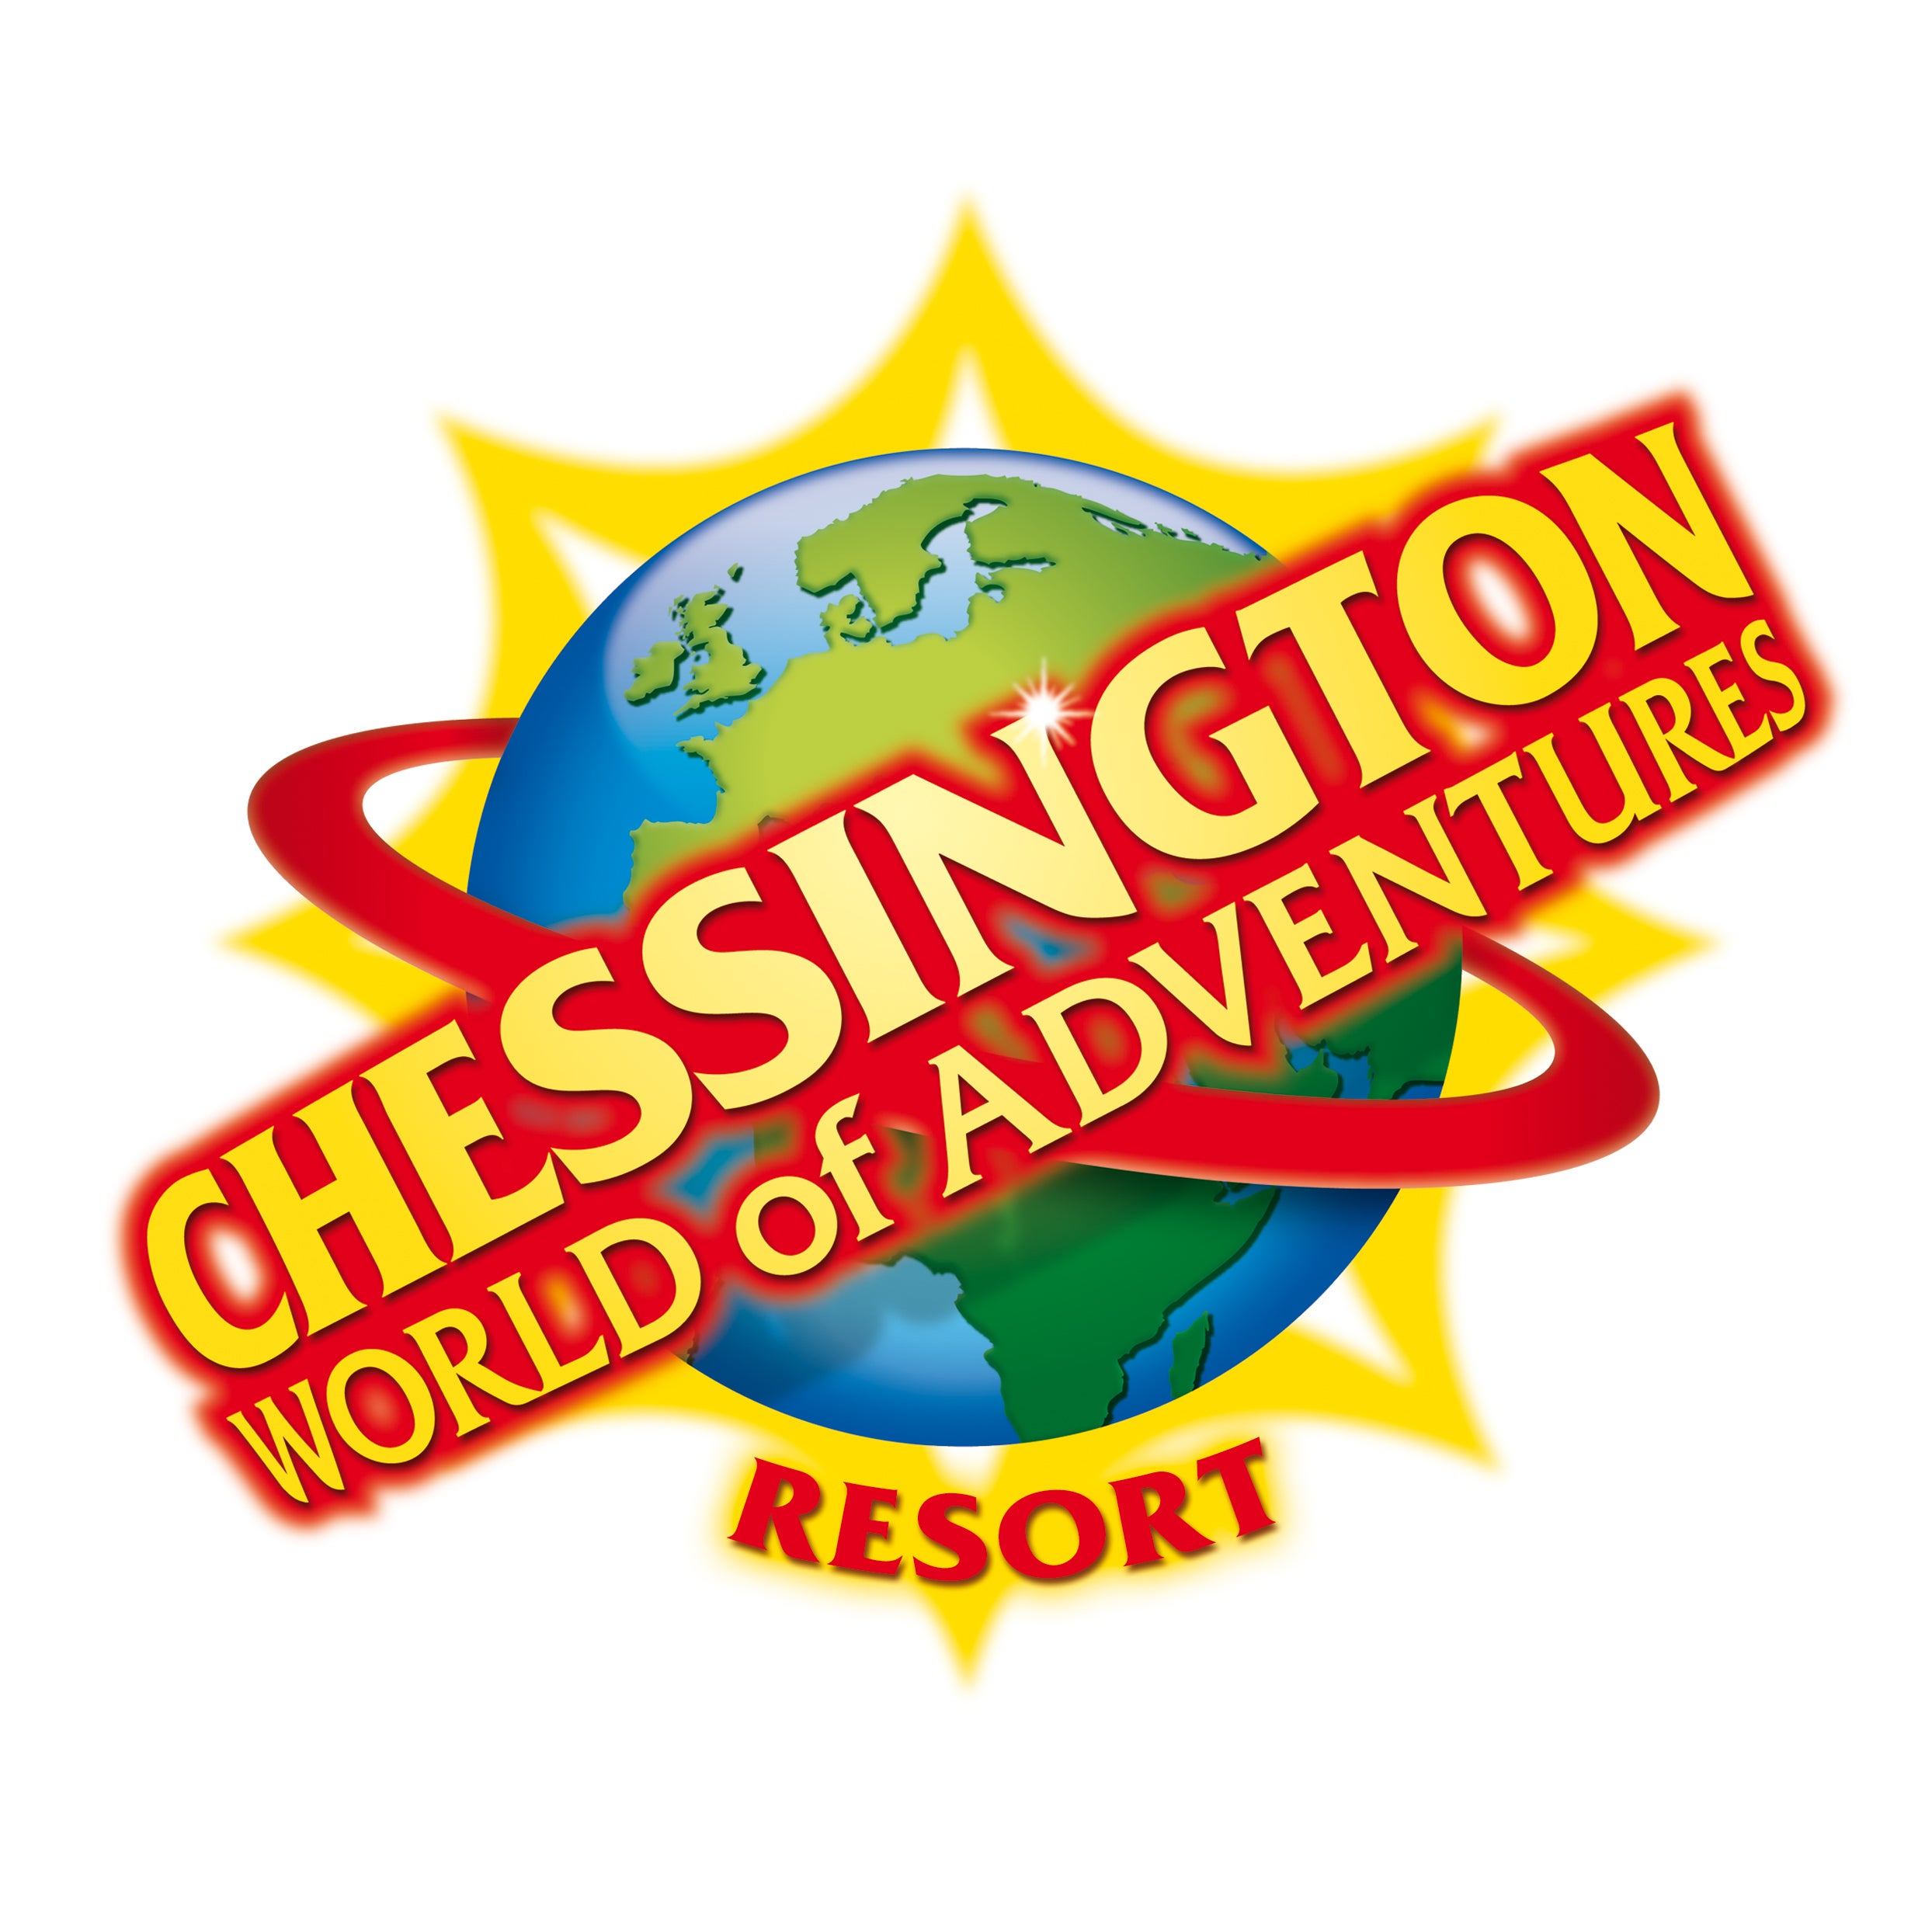 Chessington World of Adventures One Day Entry (Early Bird Of